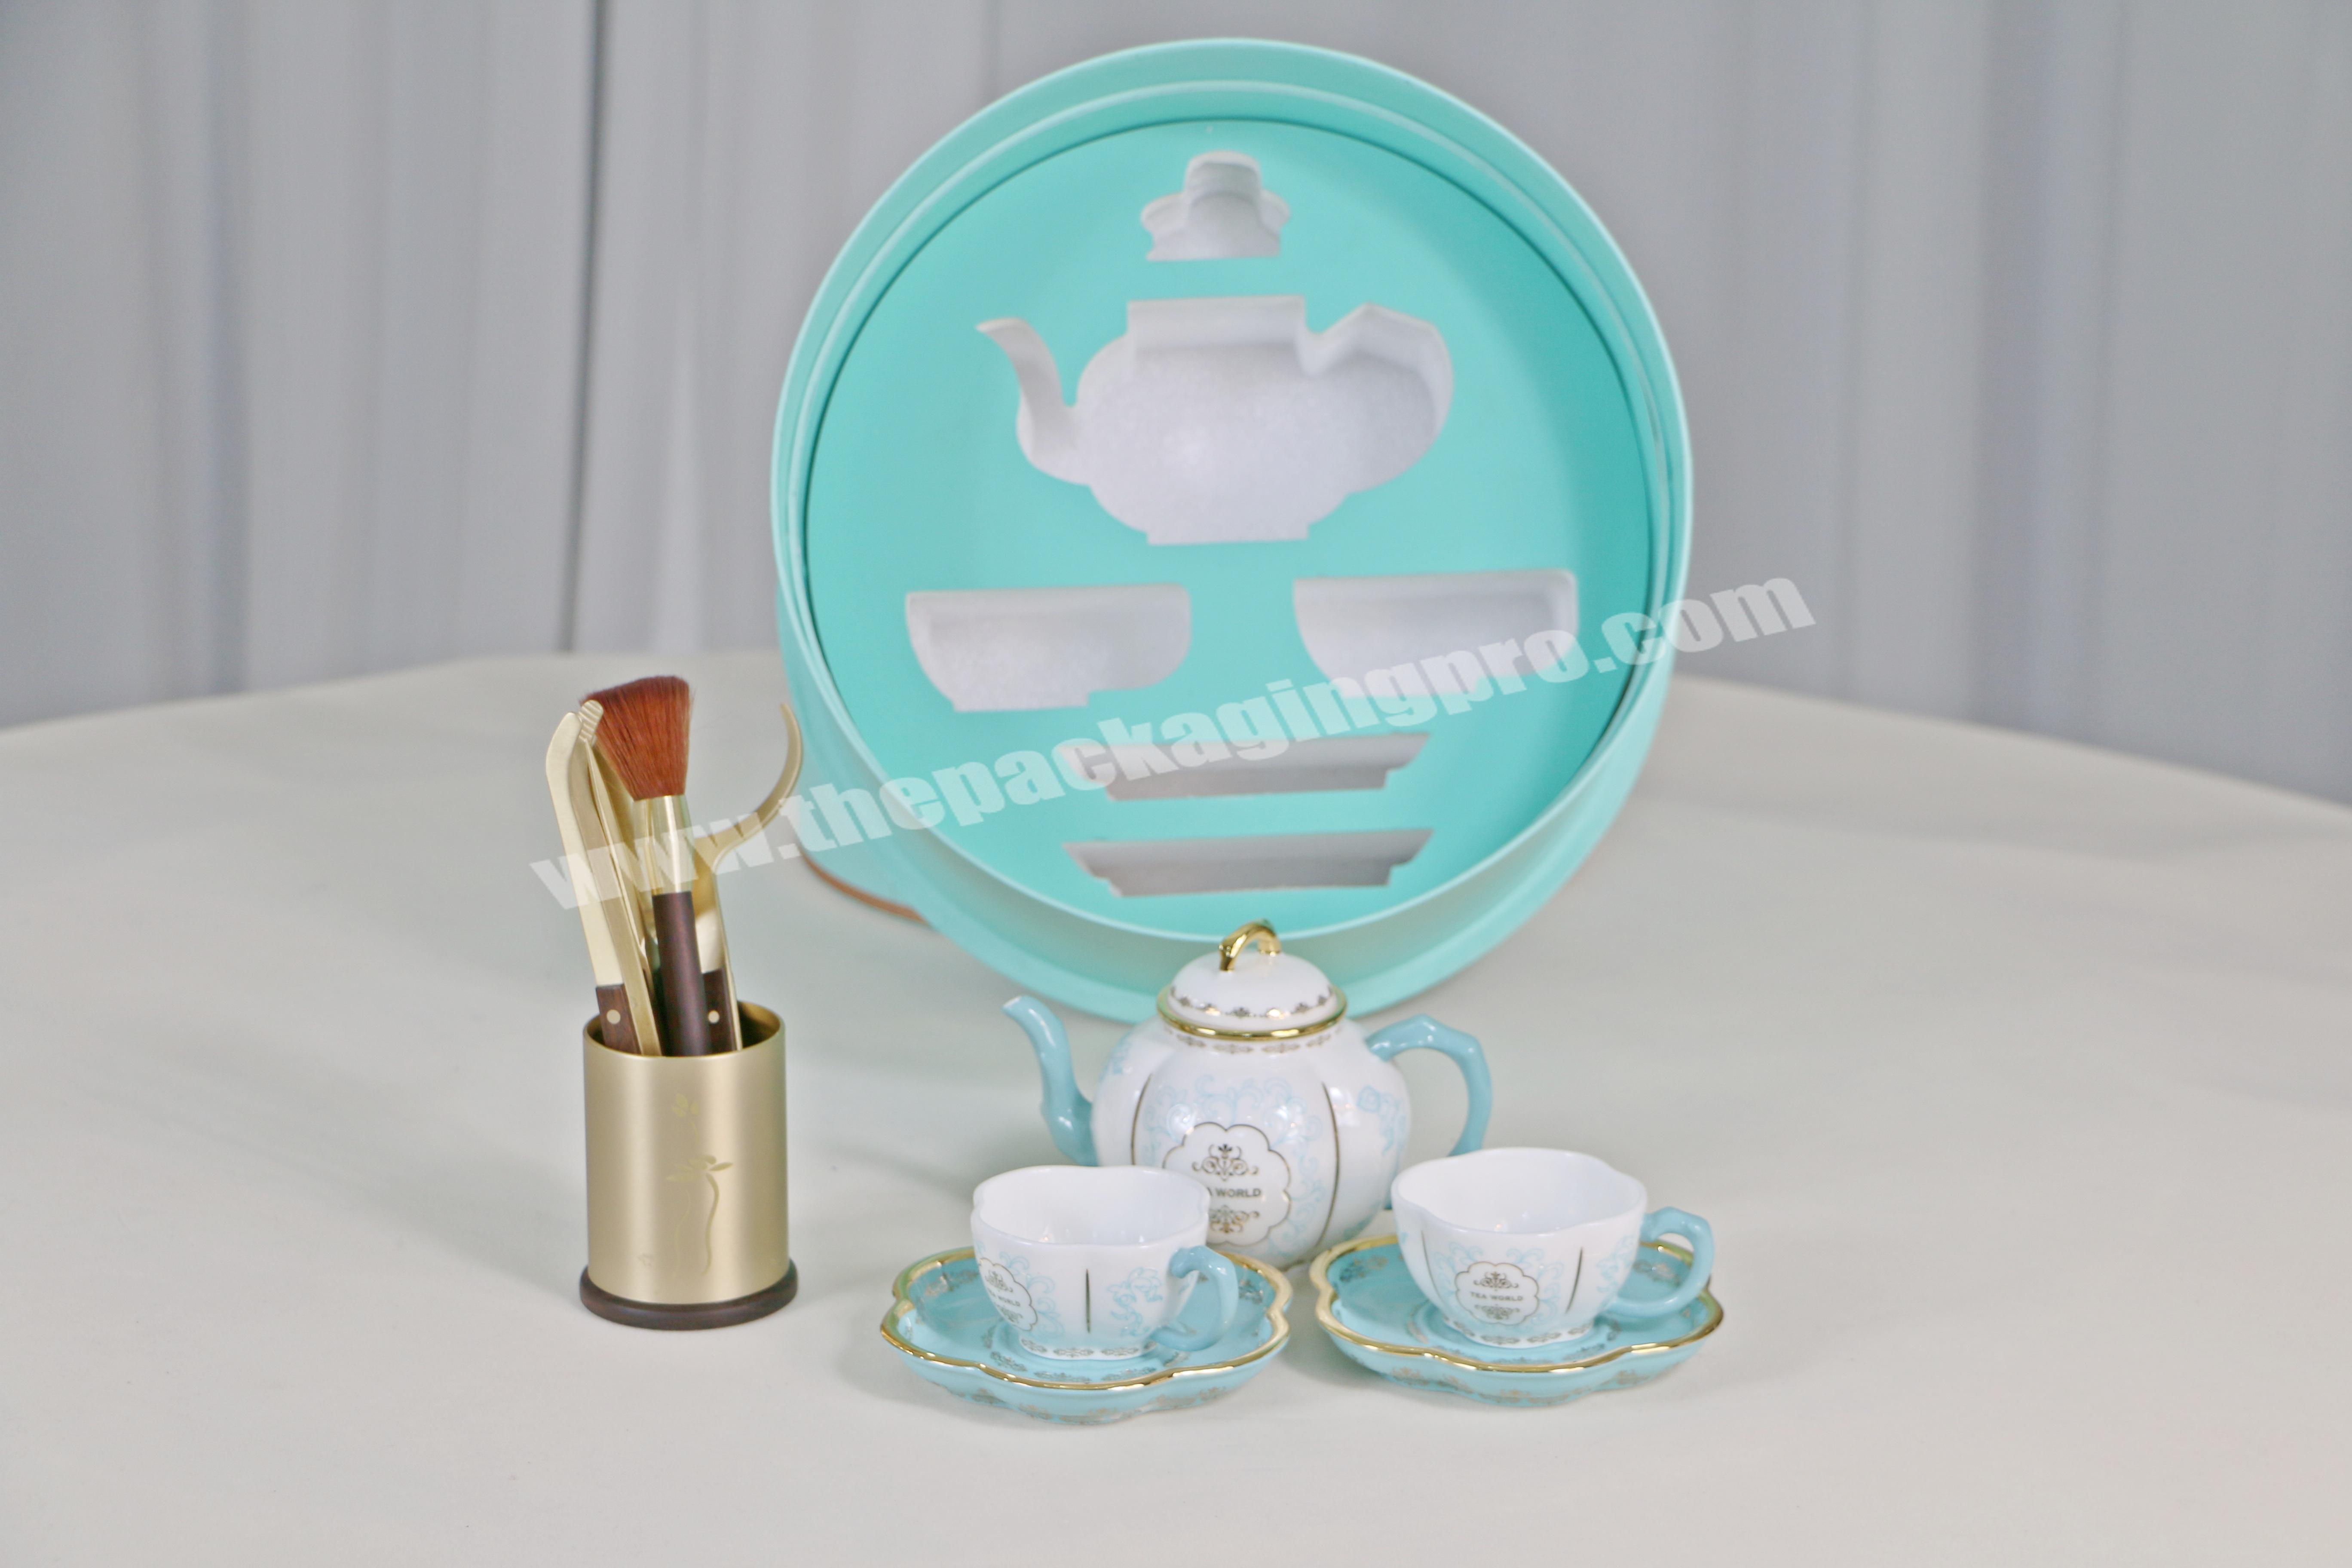 Custom Design Luxury Round Shaped Tea and Tea Cup Double Layer Lid and Base Gift Box Set Manufacturer manufacturer